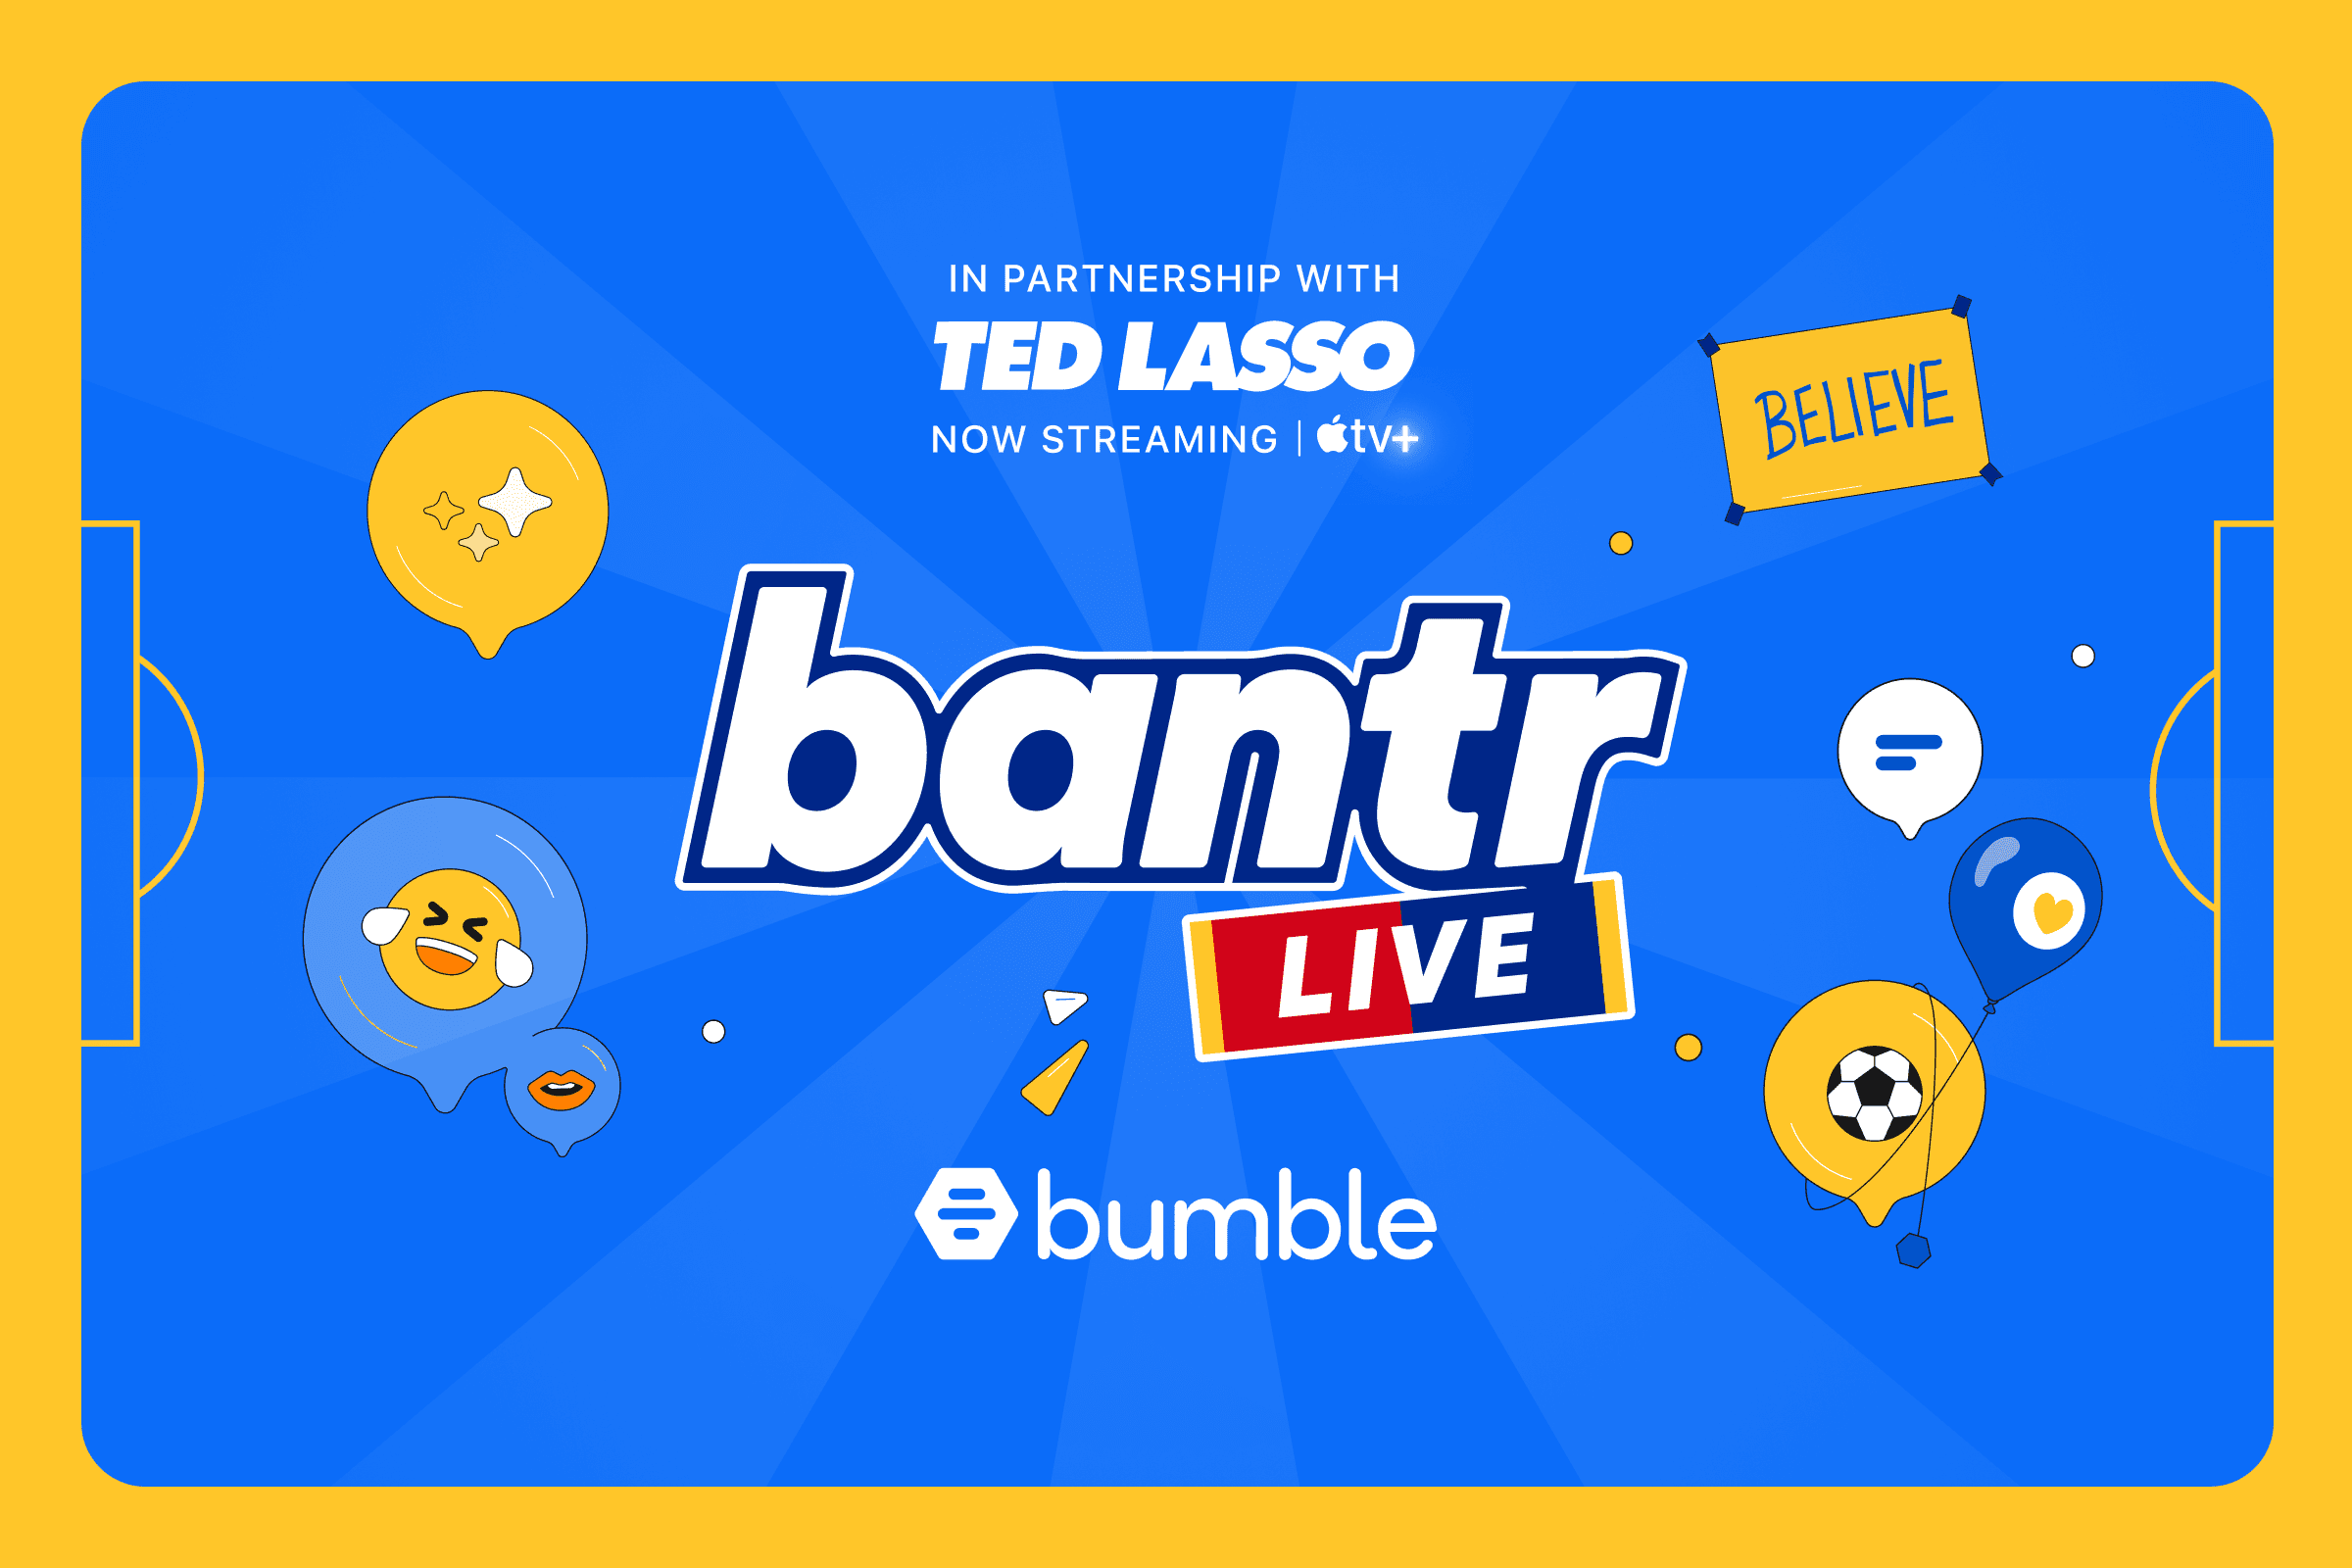 Bumble Teams Up With “Ted Lasso” to Bring Bantr to Life